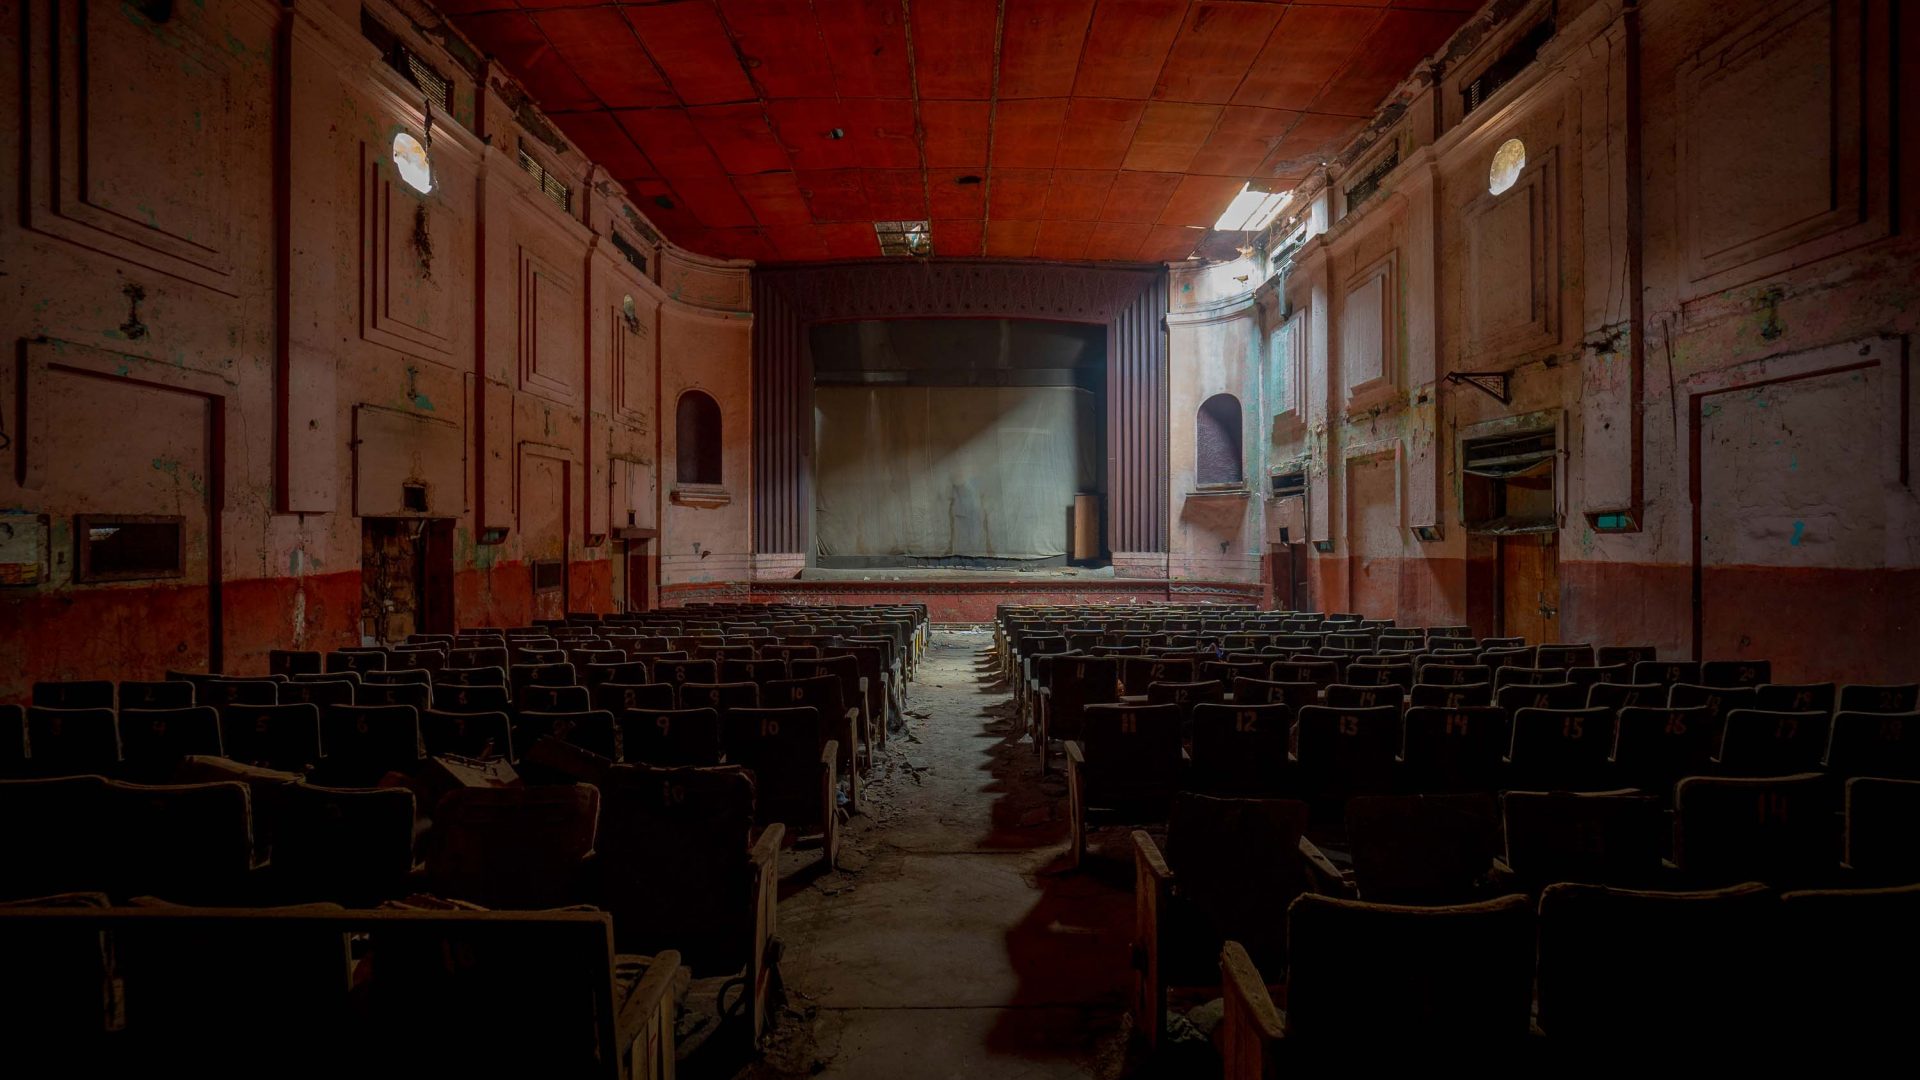 The interior of an abandoned cinema which is decorated and painted in red tones.